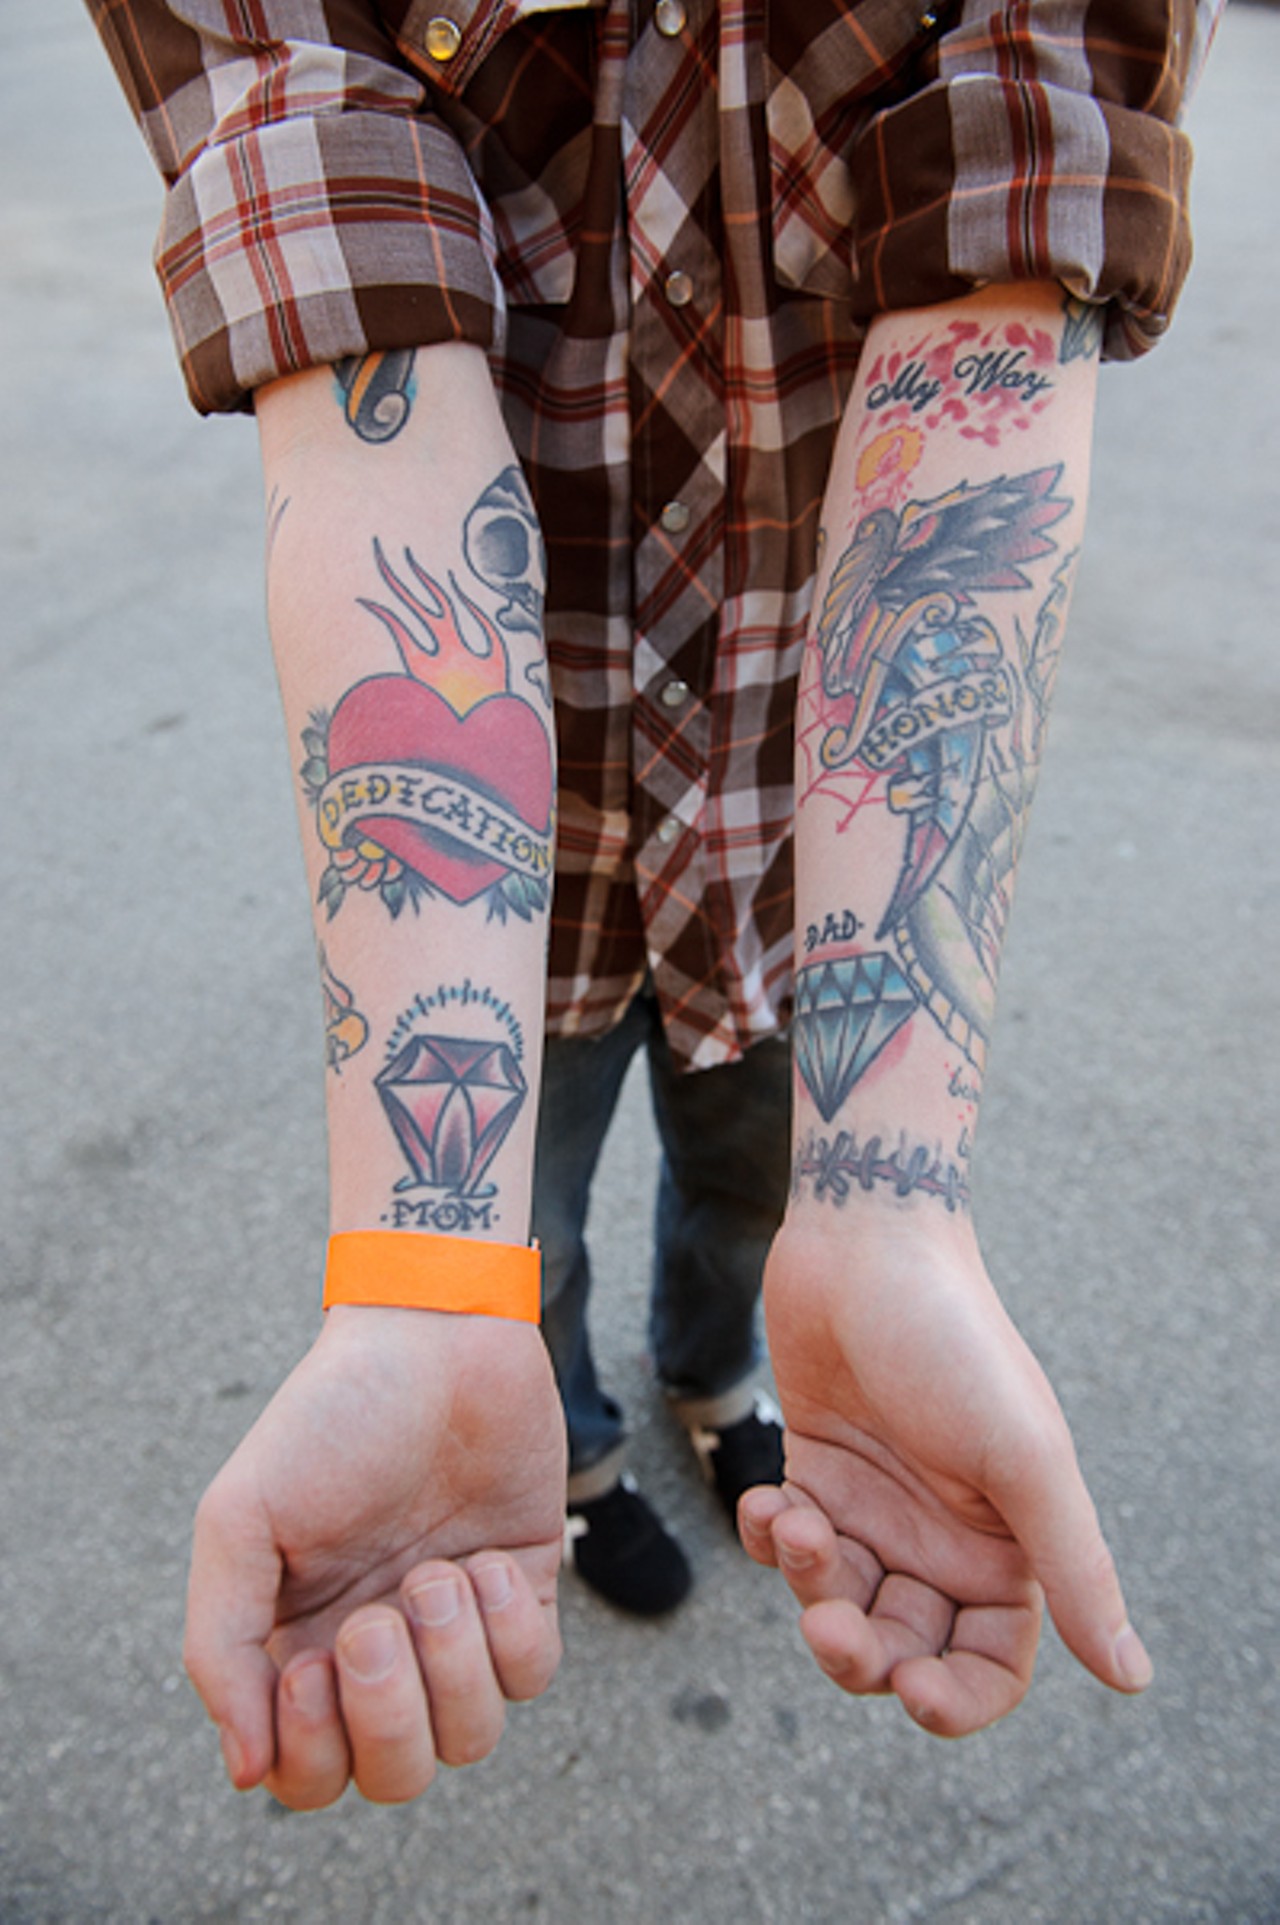 A Bronx fan shows off his tattooed-up forearms in the parking lot outside Pop's in Sauget, Illinois, before going inside to see the band perform on April 10. Read The Bronx concert review here. and See more photos from the Bronx/Mariachi El Bronx show at Pop's here.